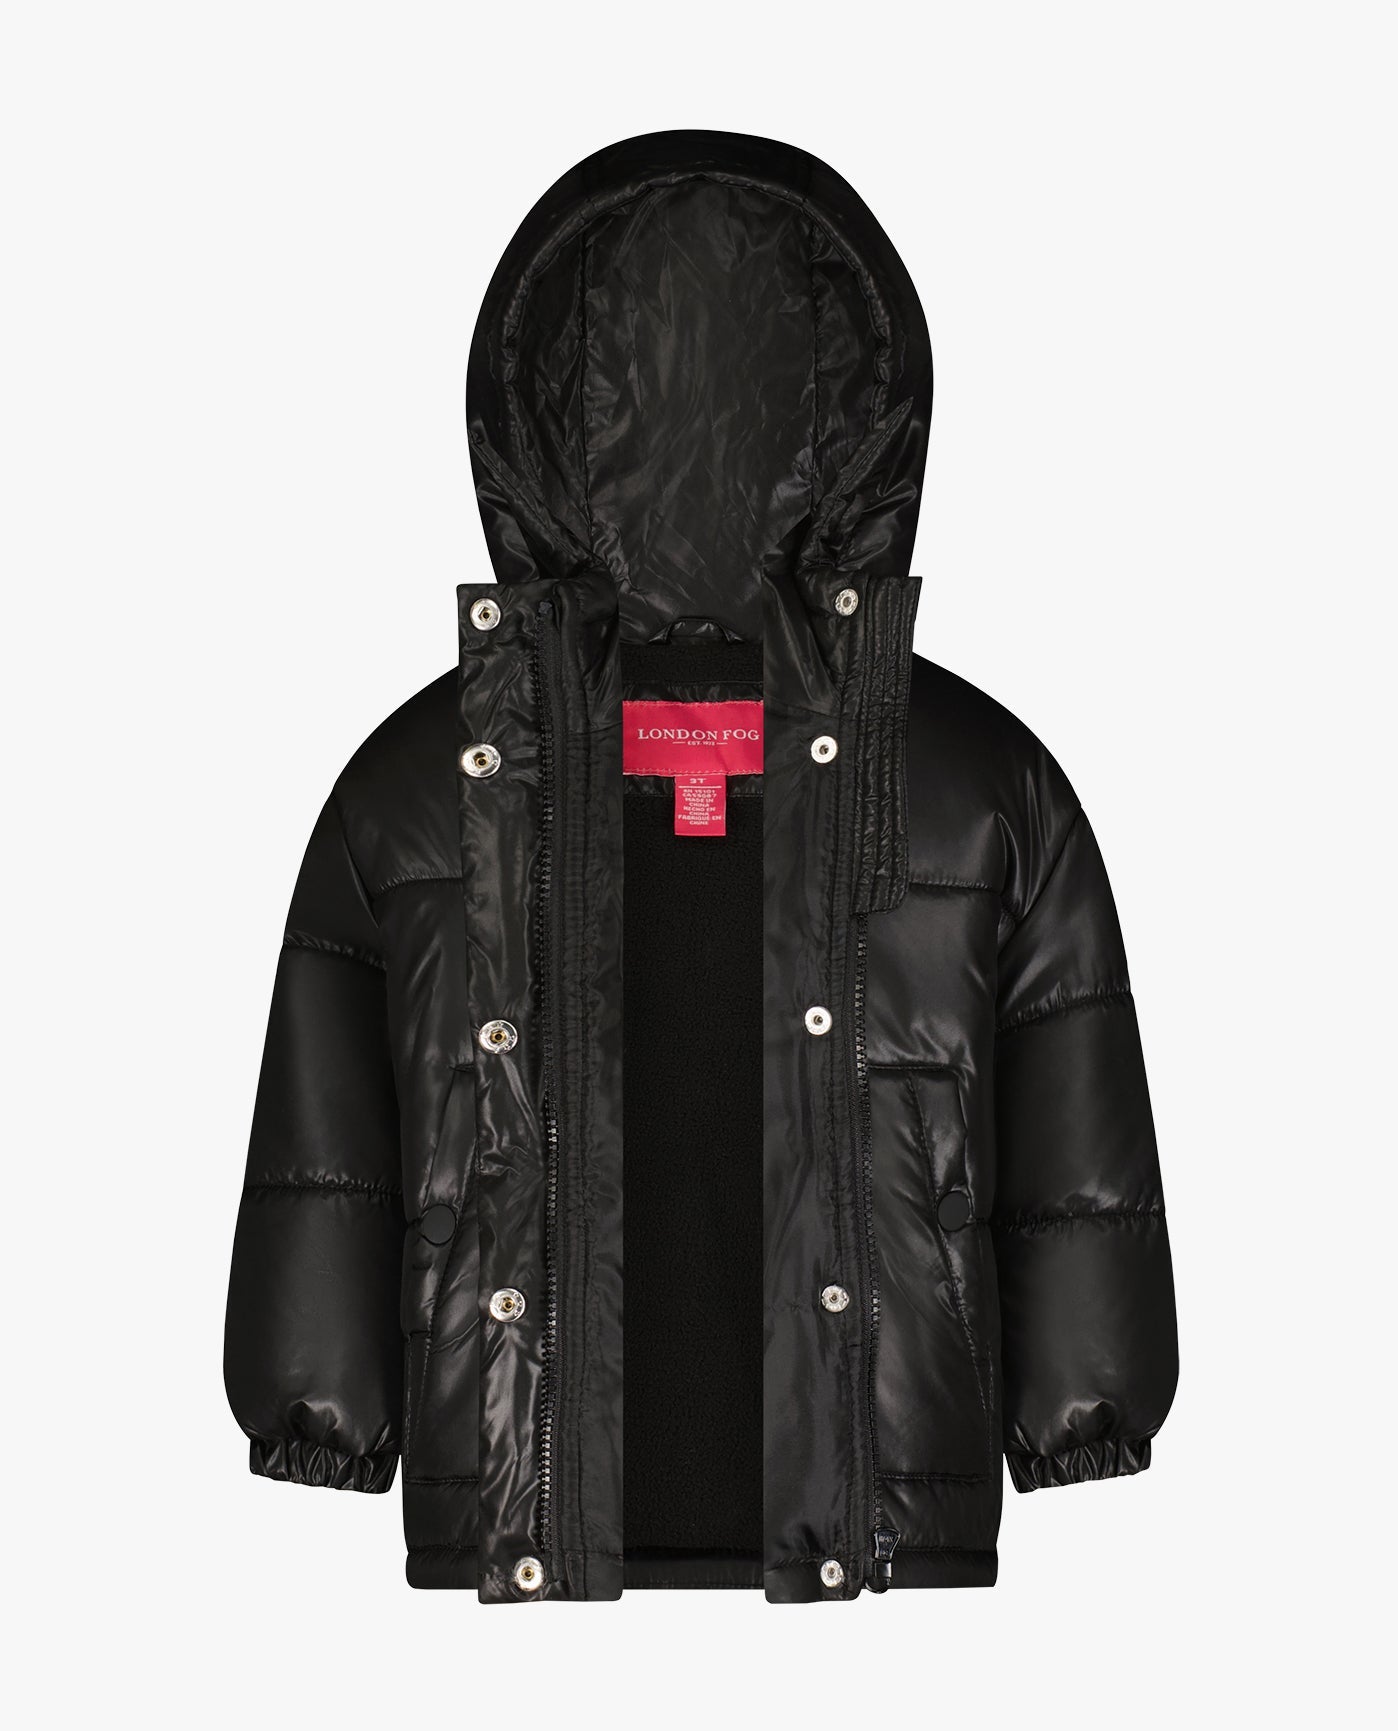 Detail View Of TODDLER GIRLS ZIP-FRONT HEAVY WEIGHT PUFFER | BLACK